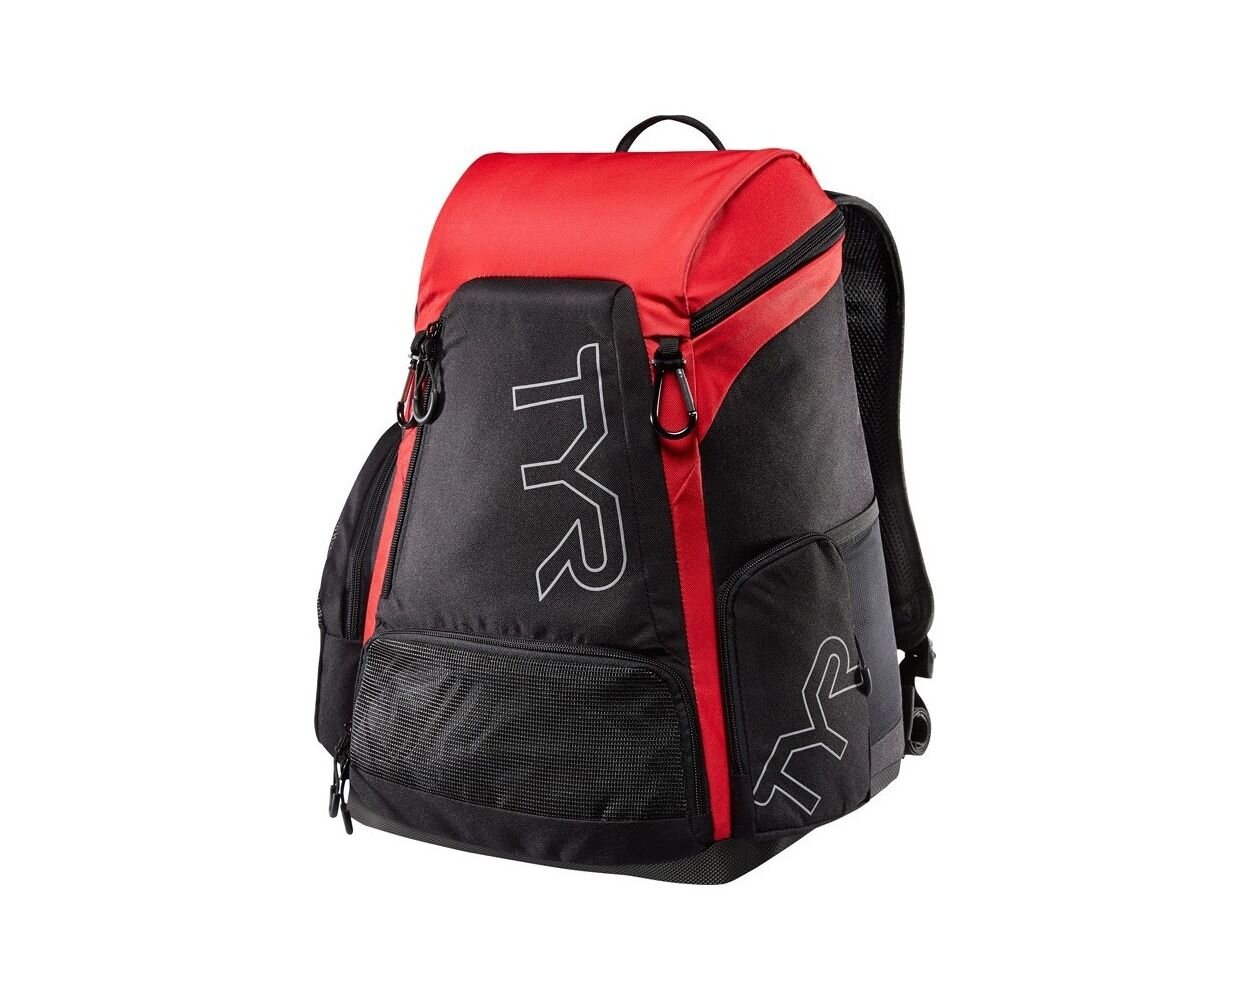 Раница за басейн TYR Alliance Backpack 30L red